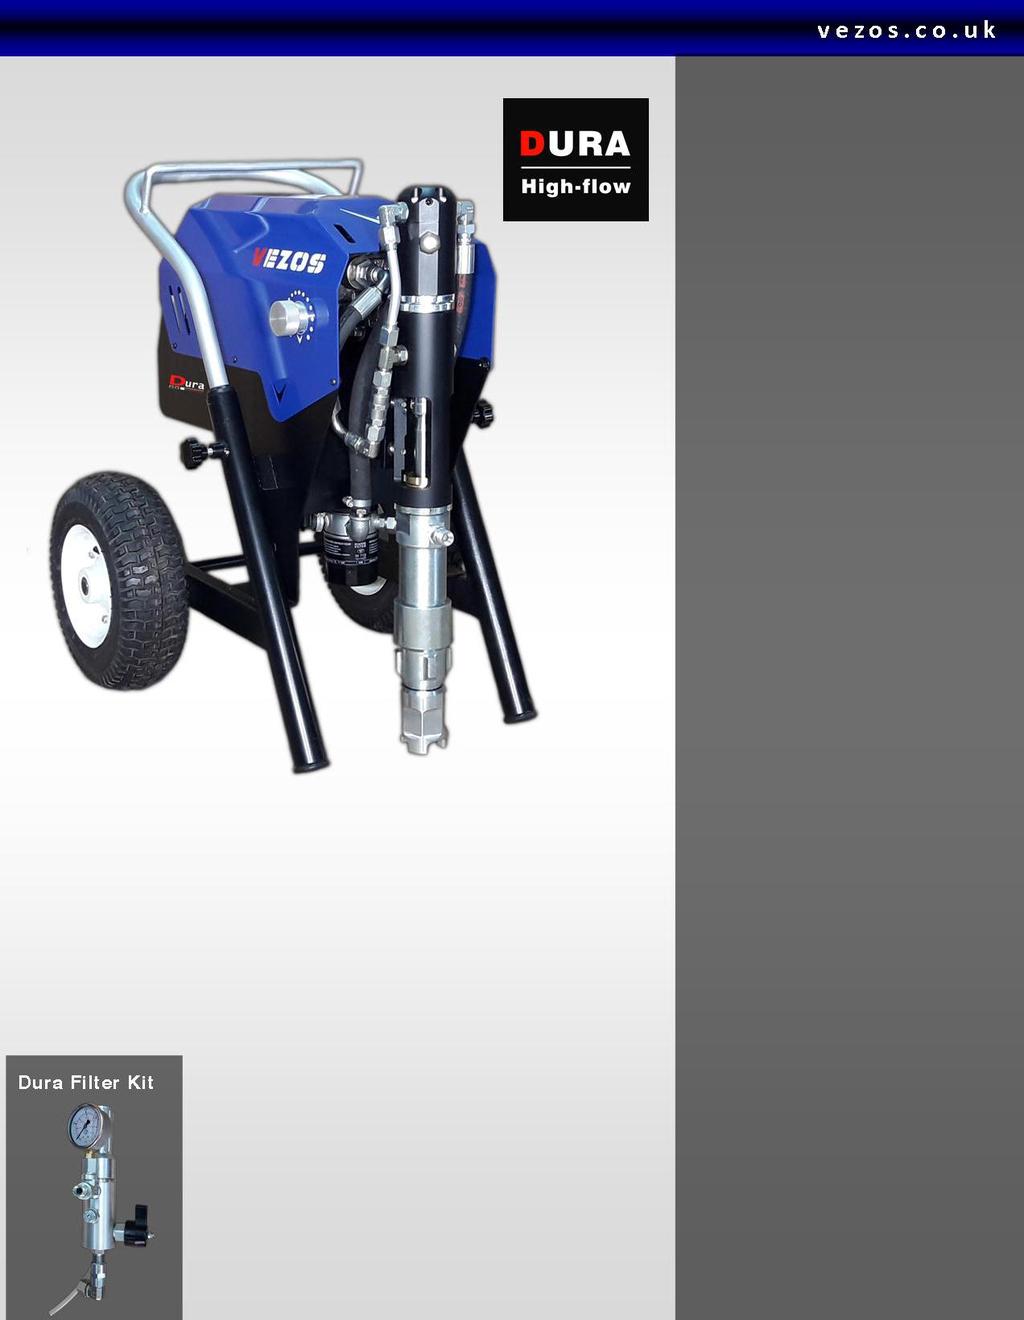 Technical Specifications Edition Max Working Pressure Max Flow Delivery Power Motor Pump Cart Hydraulic Reservoir Weight Dimensions Dura 8 High-Flow 177 bar / 2600 psi 10.